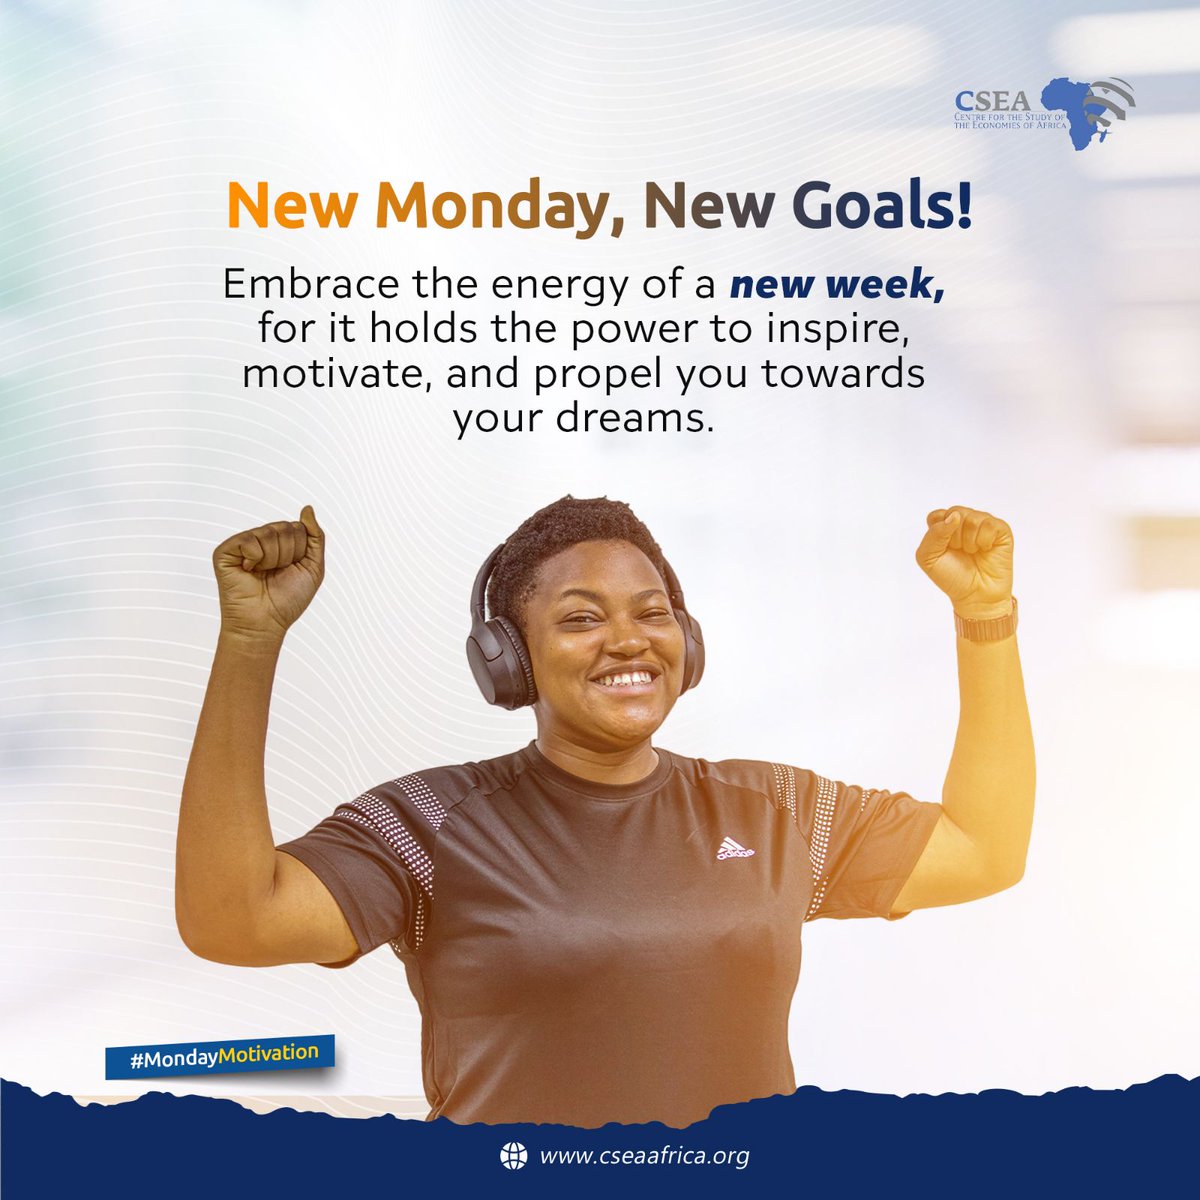 Start your week with a burst of positivity and embrace the energy of new beginnings! #MondayMotivation